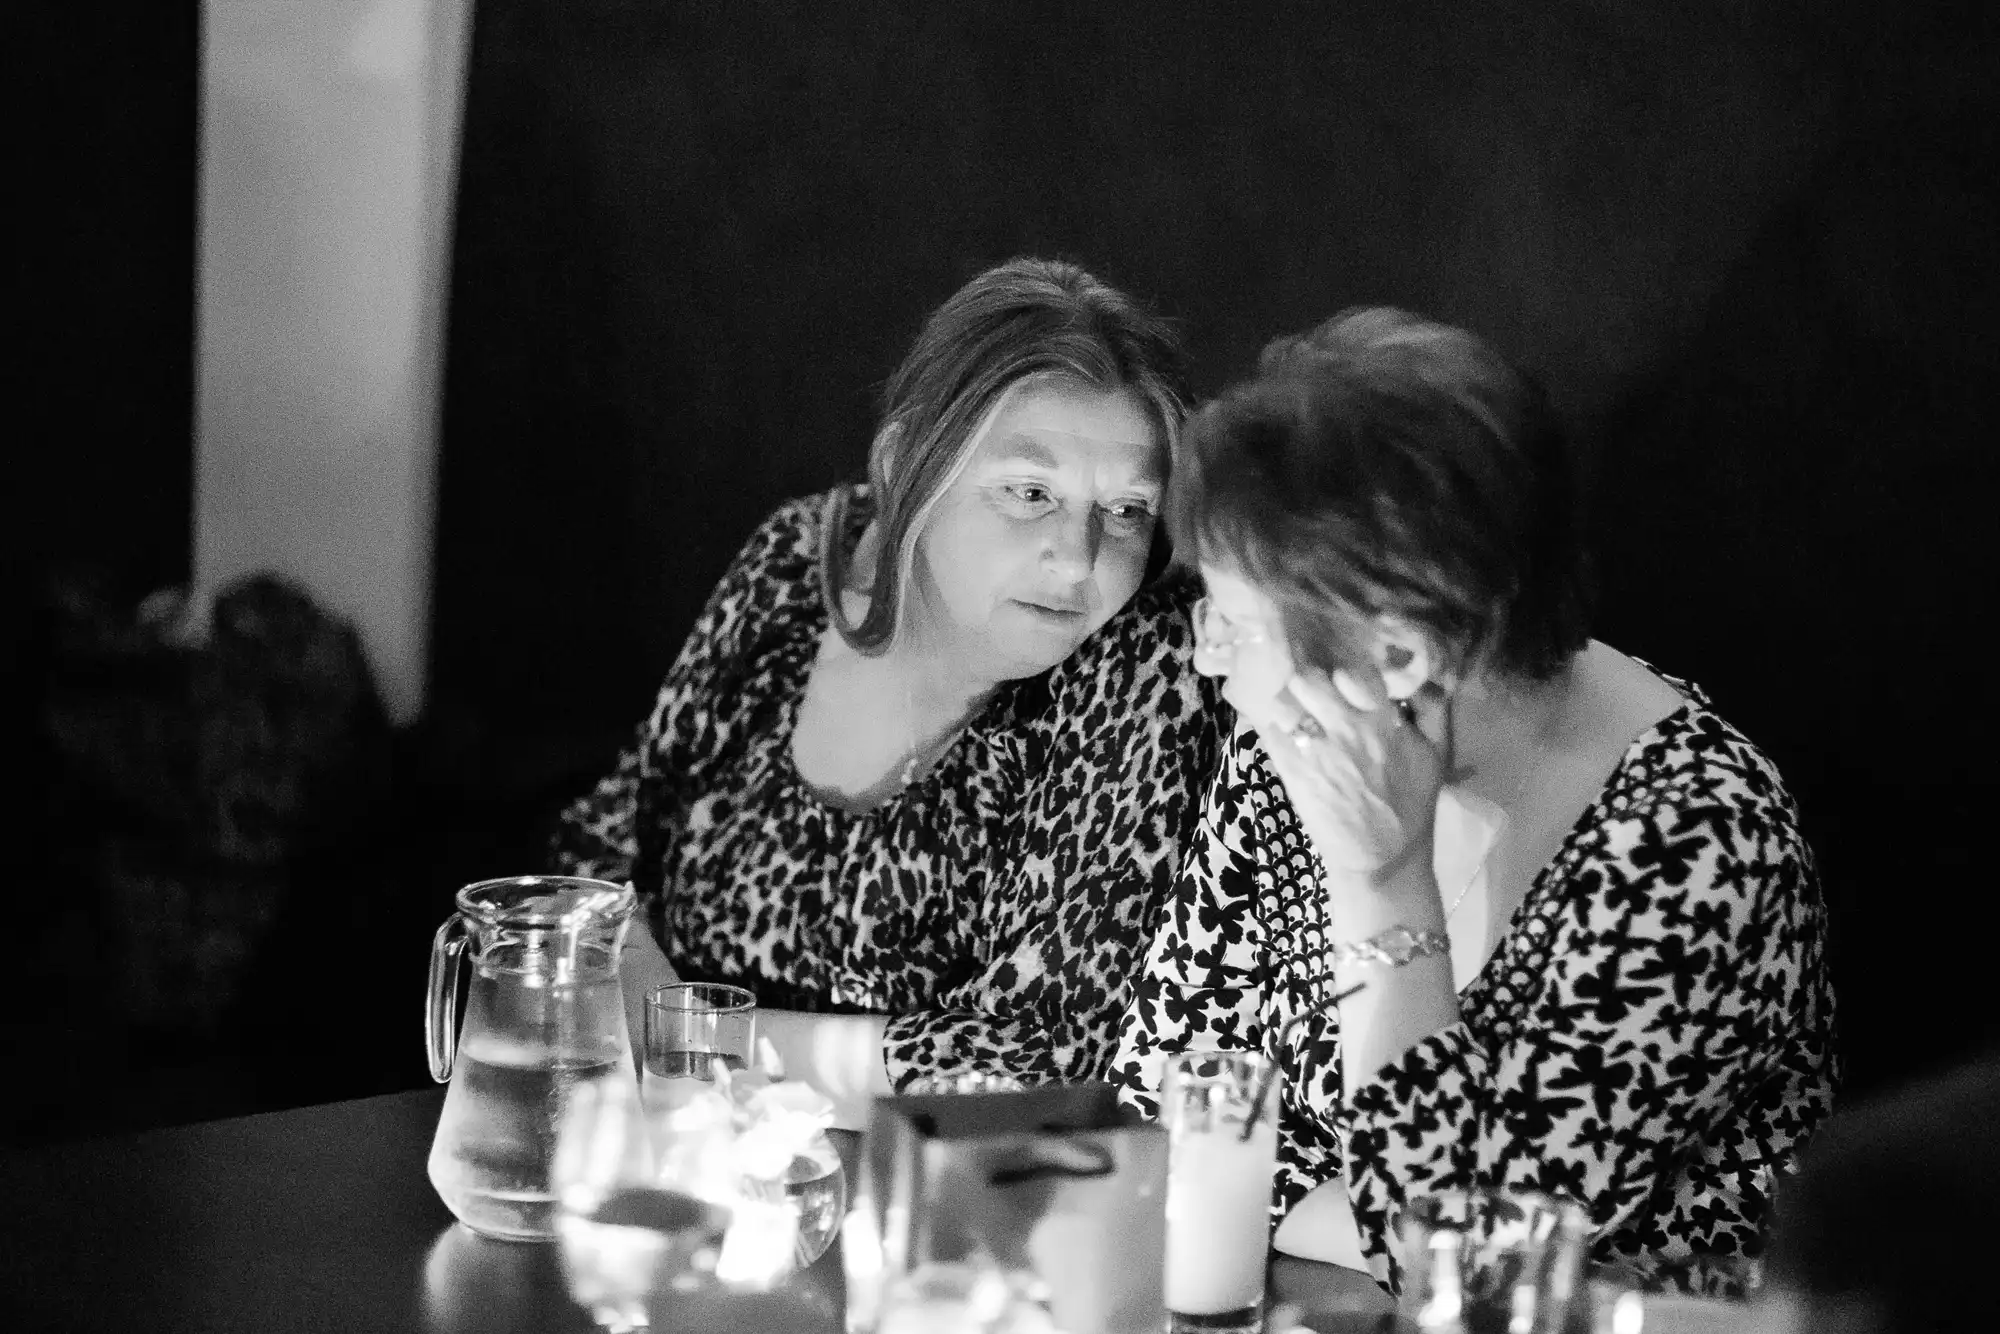 Two women engaged in a serious conversation at a dimly lit table with candles and a water pitcher.